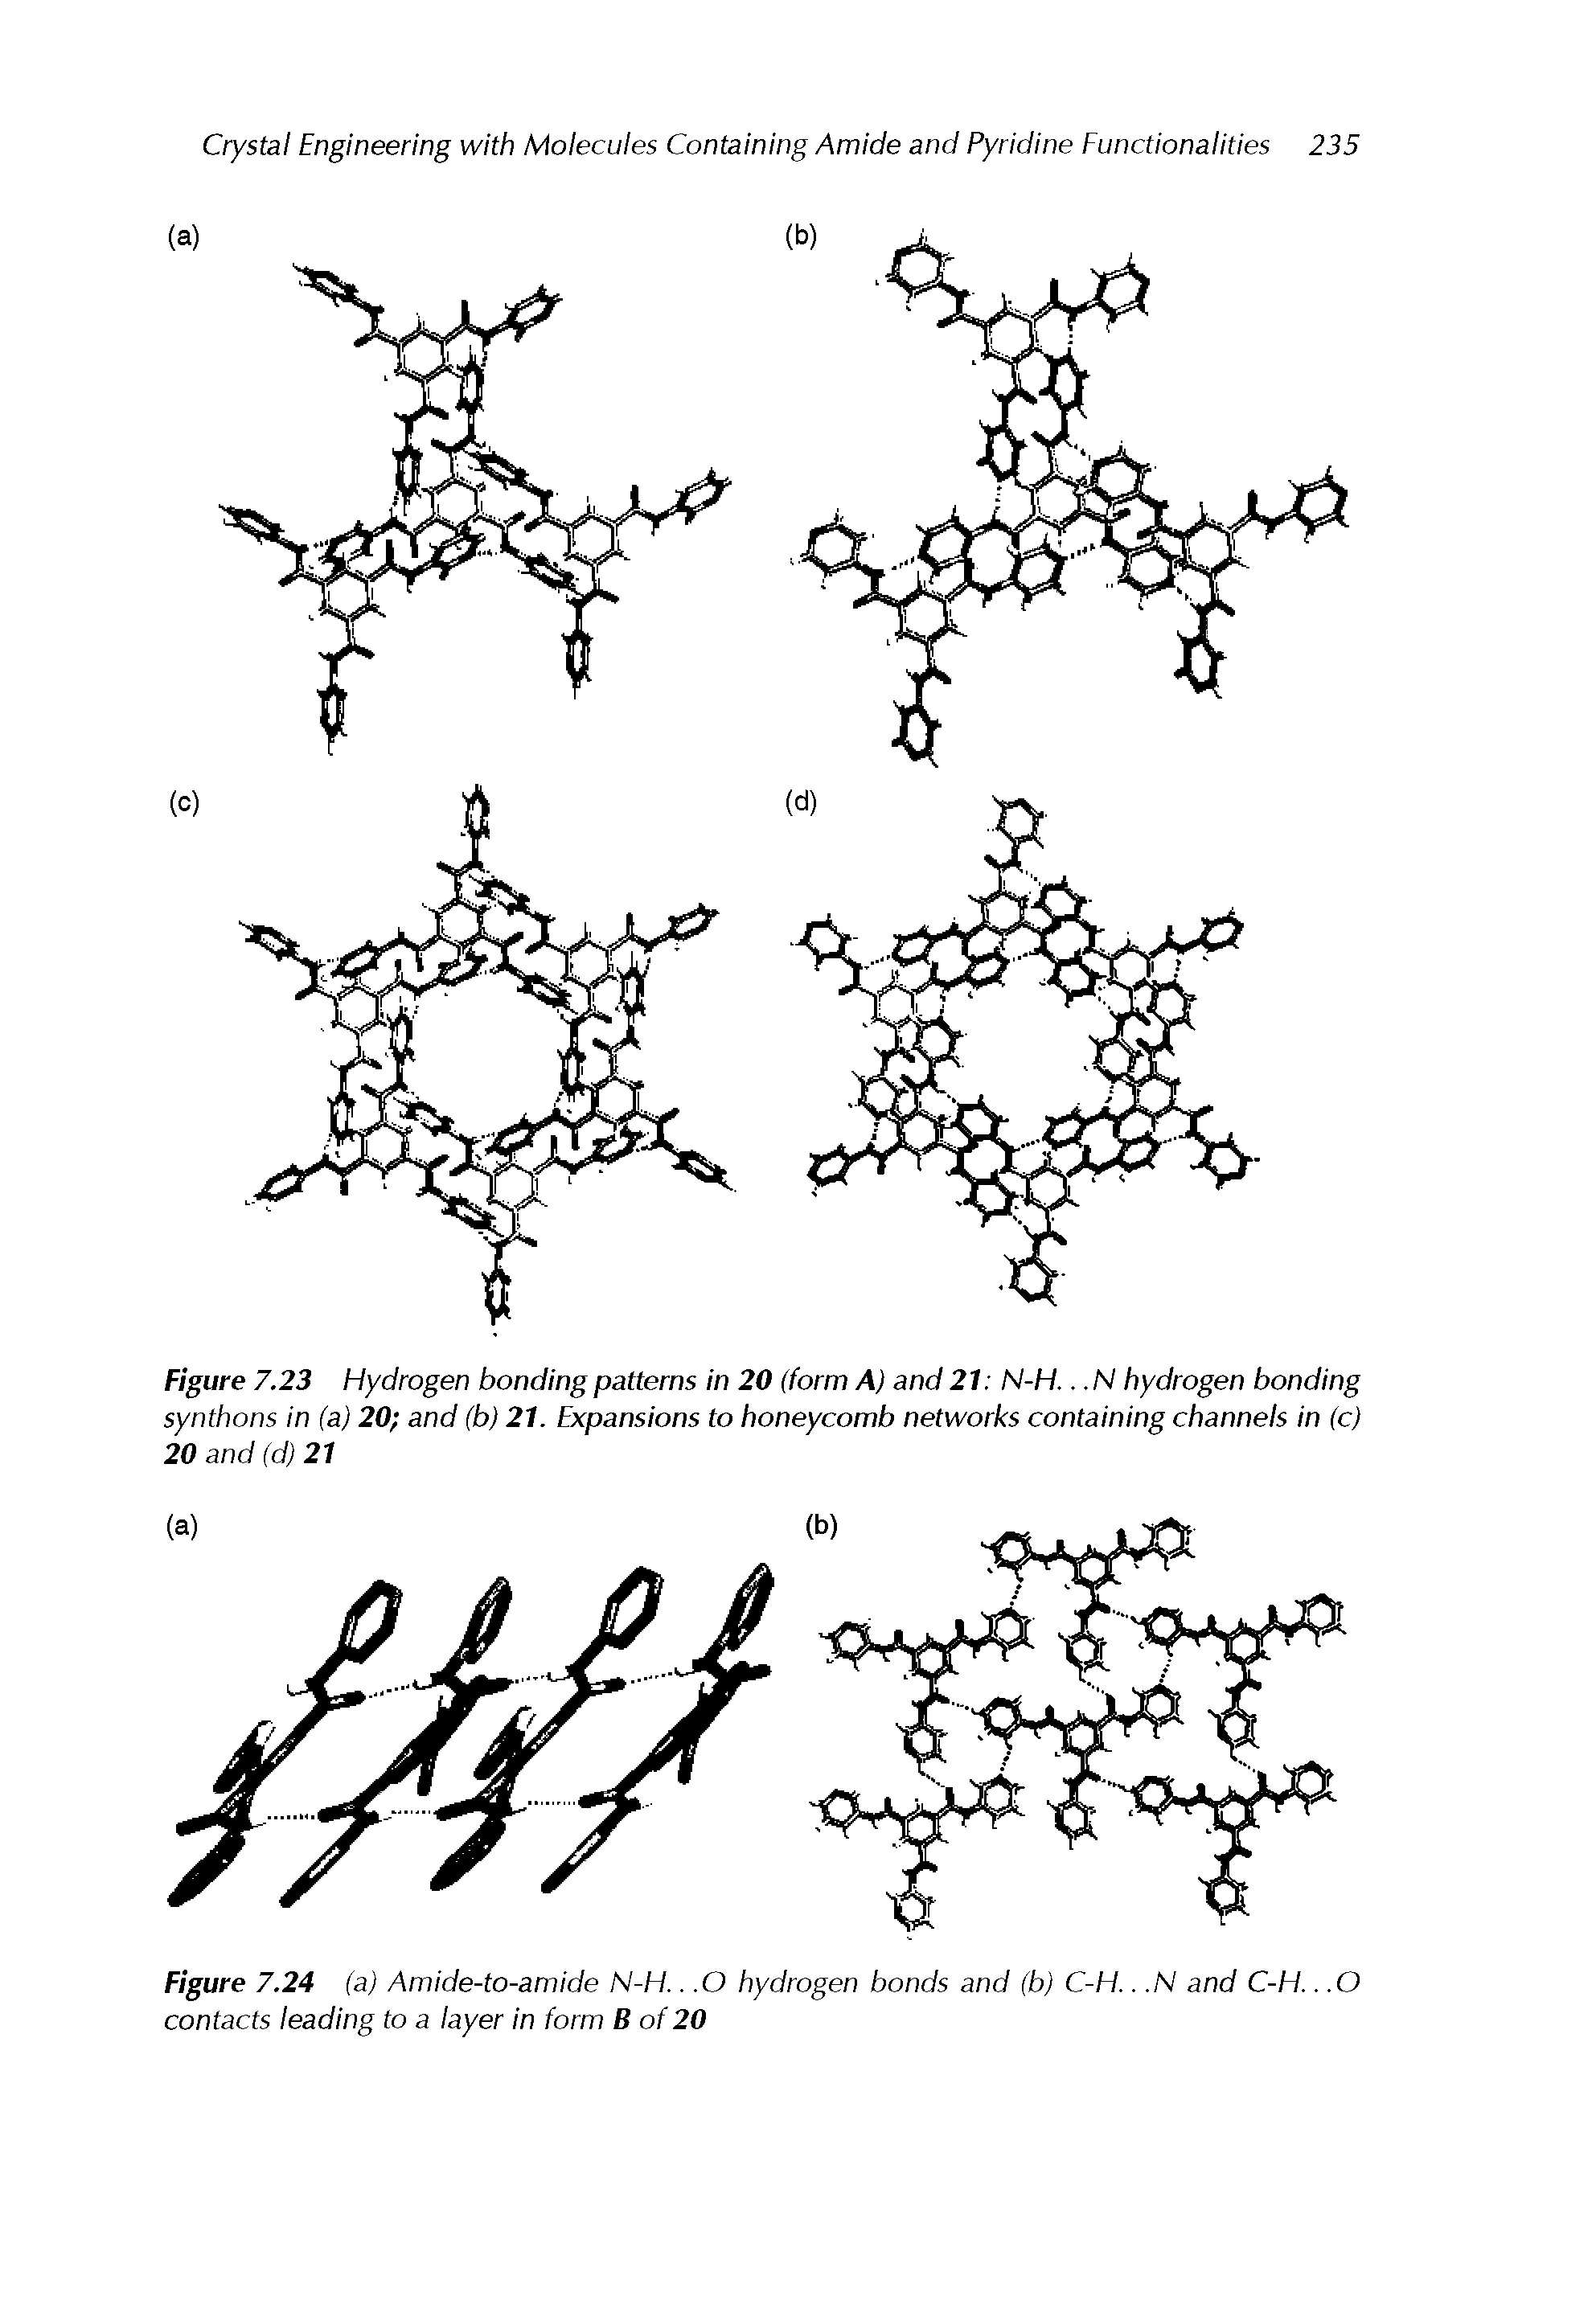 Figure 7.23 Hydrogen bonding patterns in 20 (form A) and 21 N-H... N hydrogen bonding synthons in (a) 20 and (b) 21. Expansions to honeycomb networks containing channels in (c)...